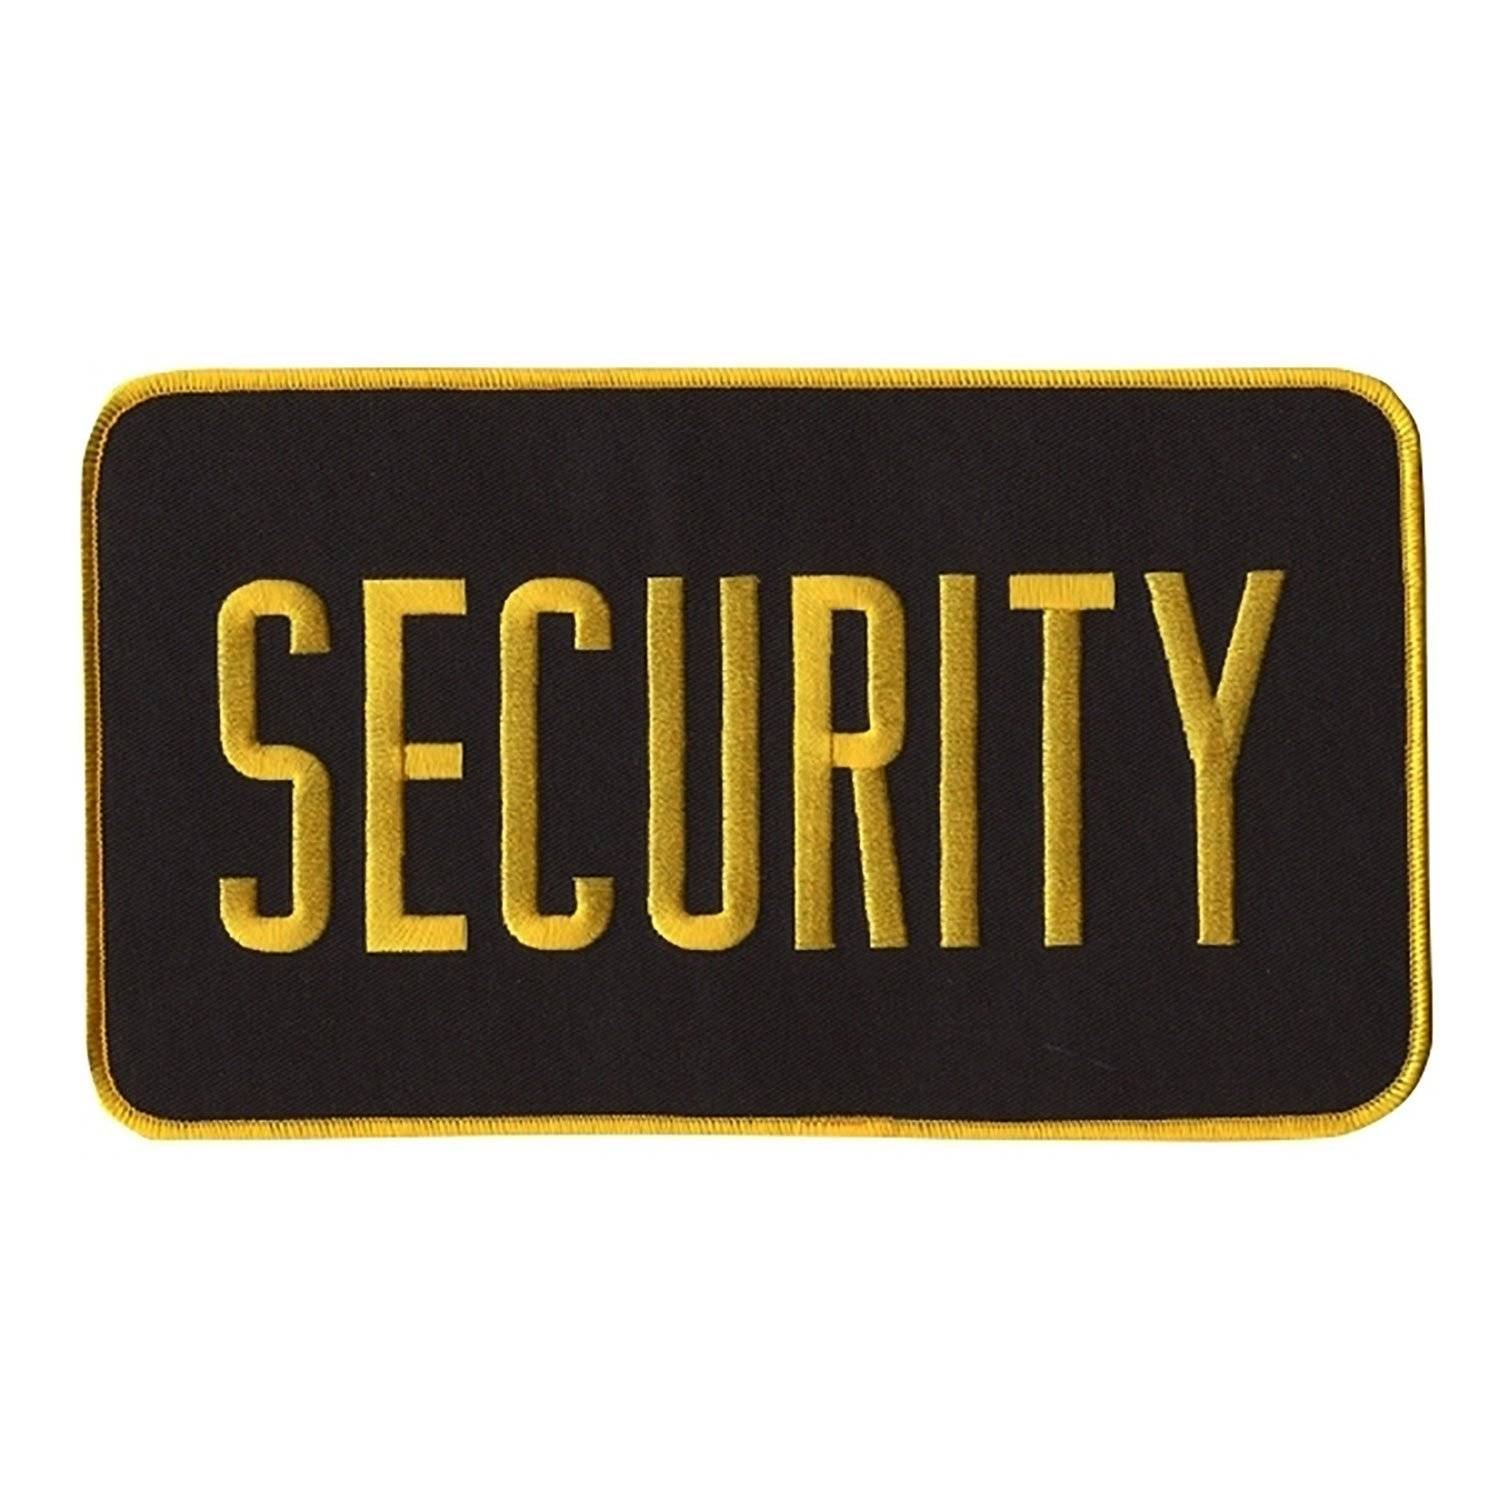 Heros Security Back Patch 9 X 5